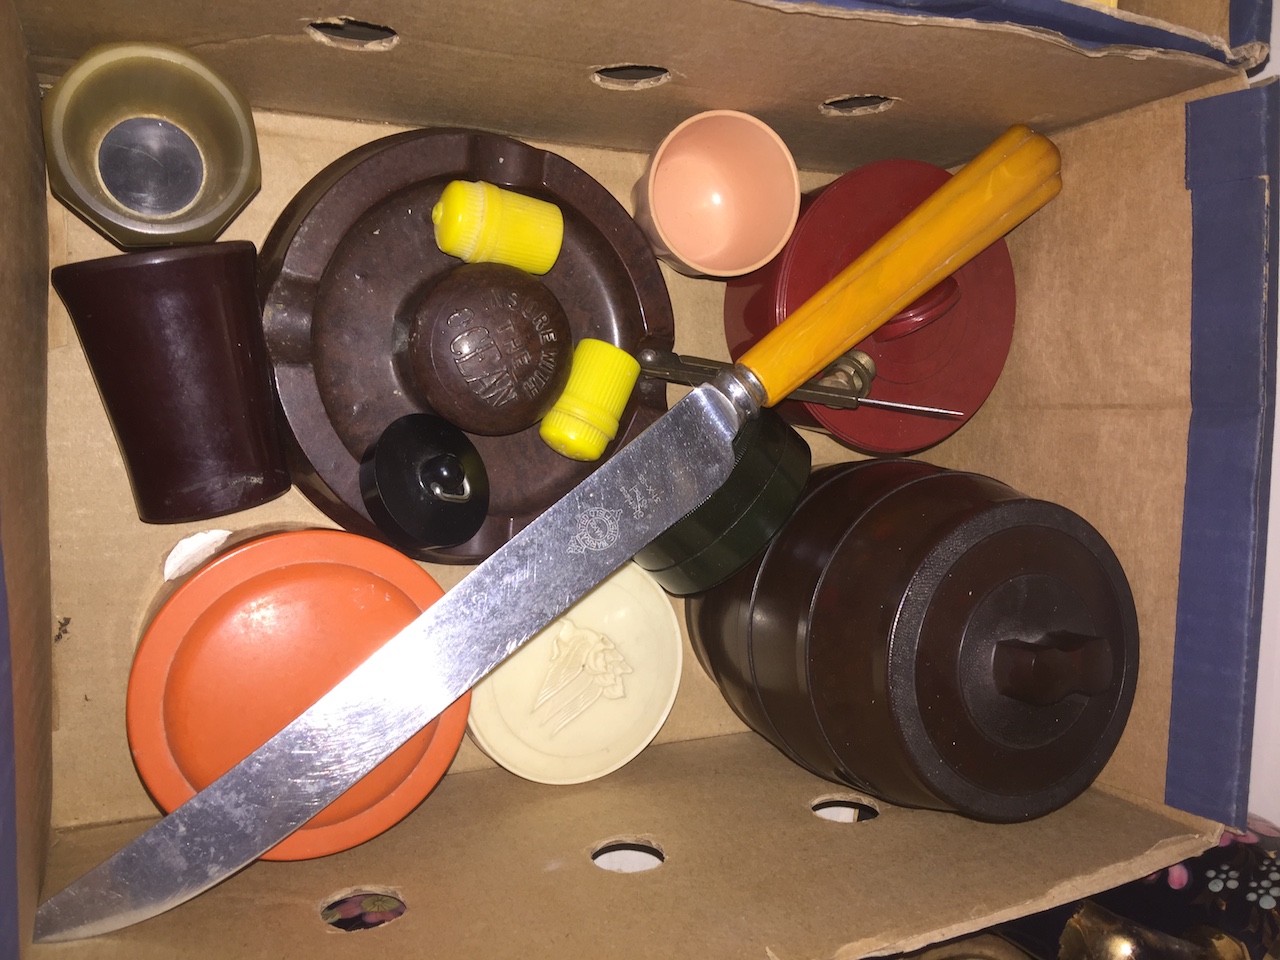 Box of vintage bakelite items and containers